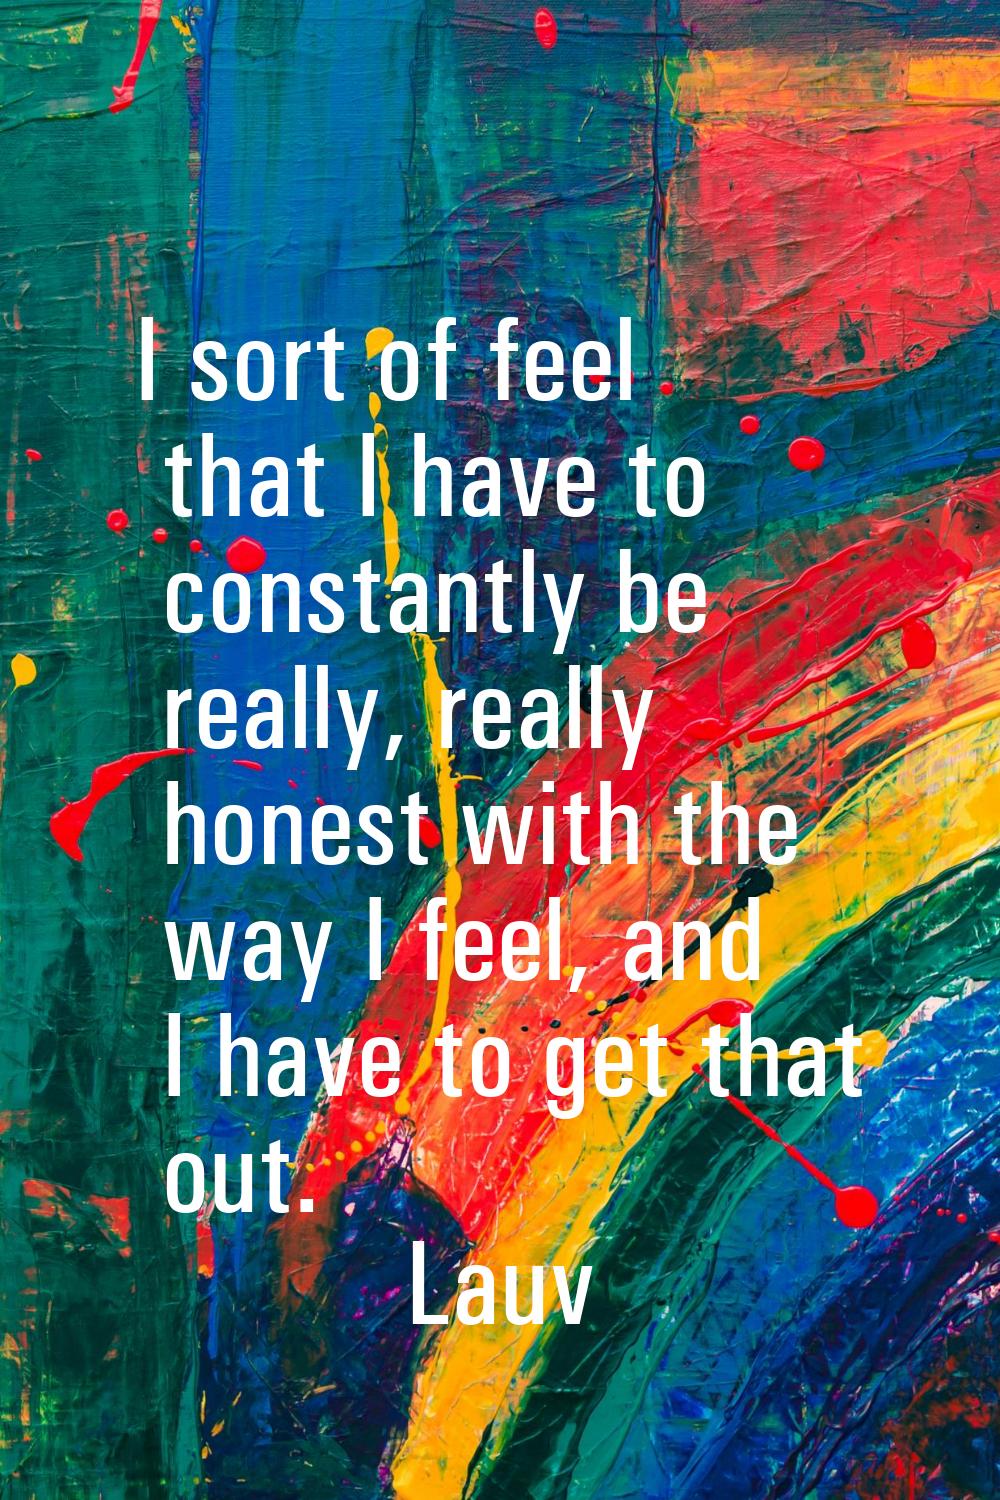 I sort of feel that I have to constantly be really, really honest with the way I feel, and I have t